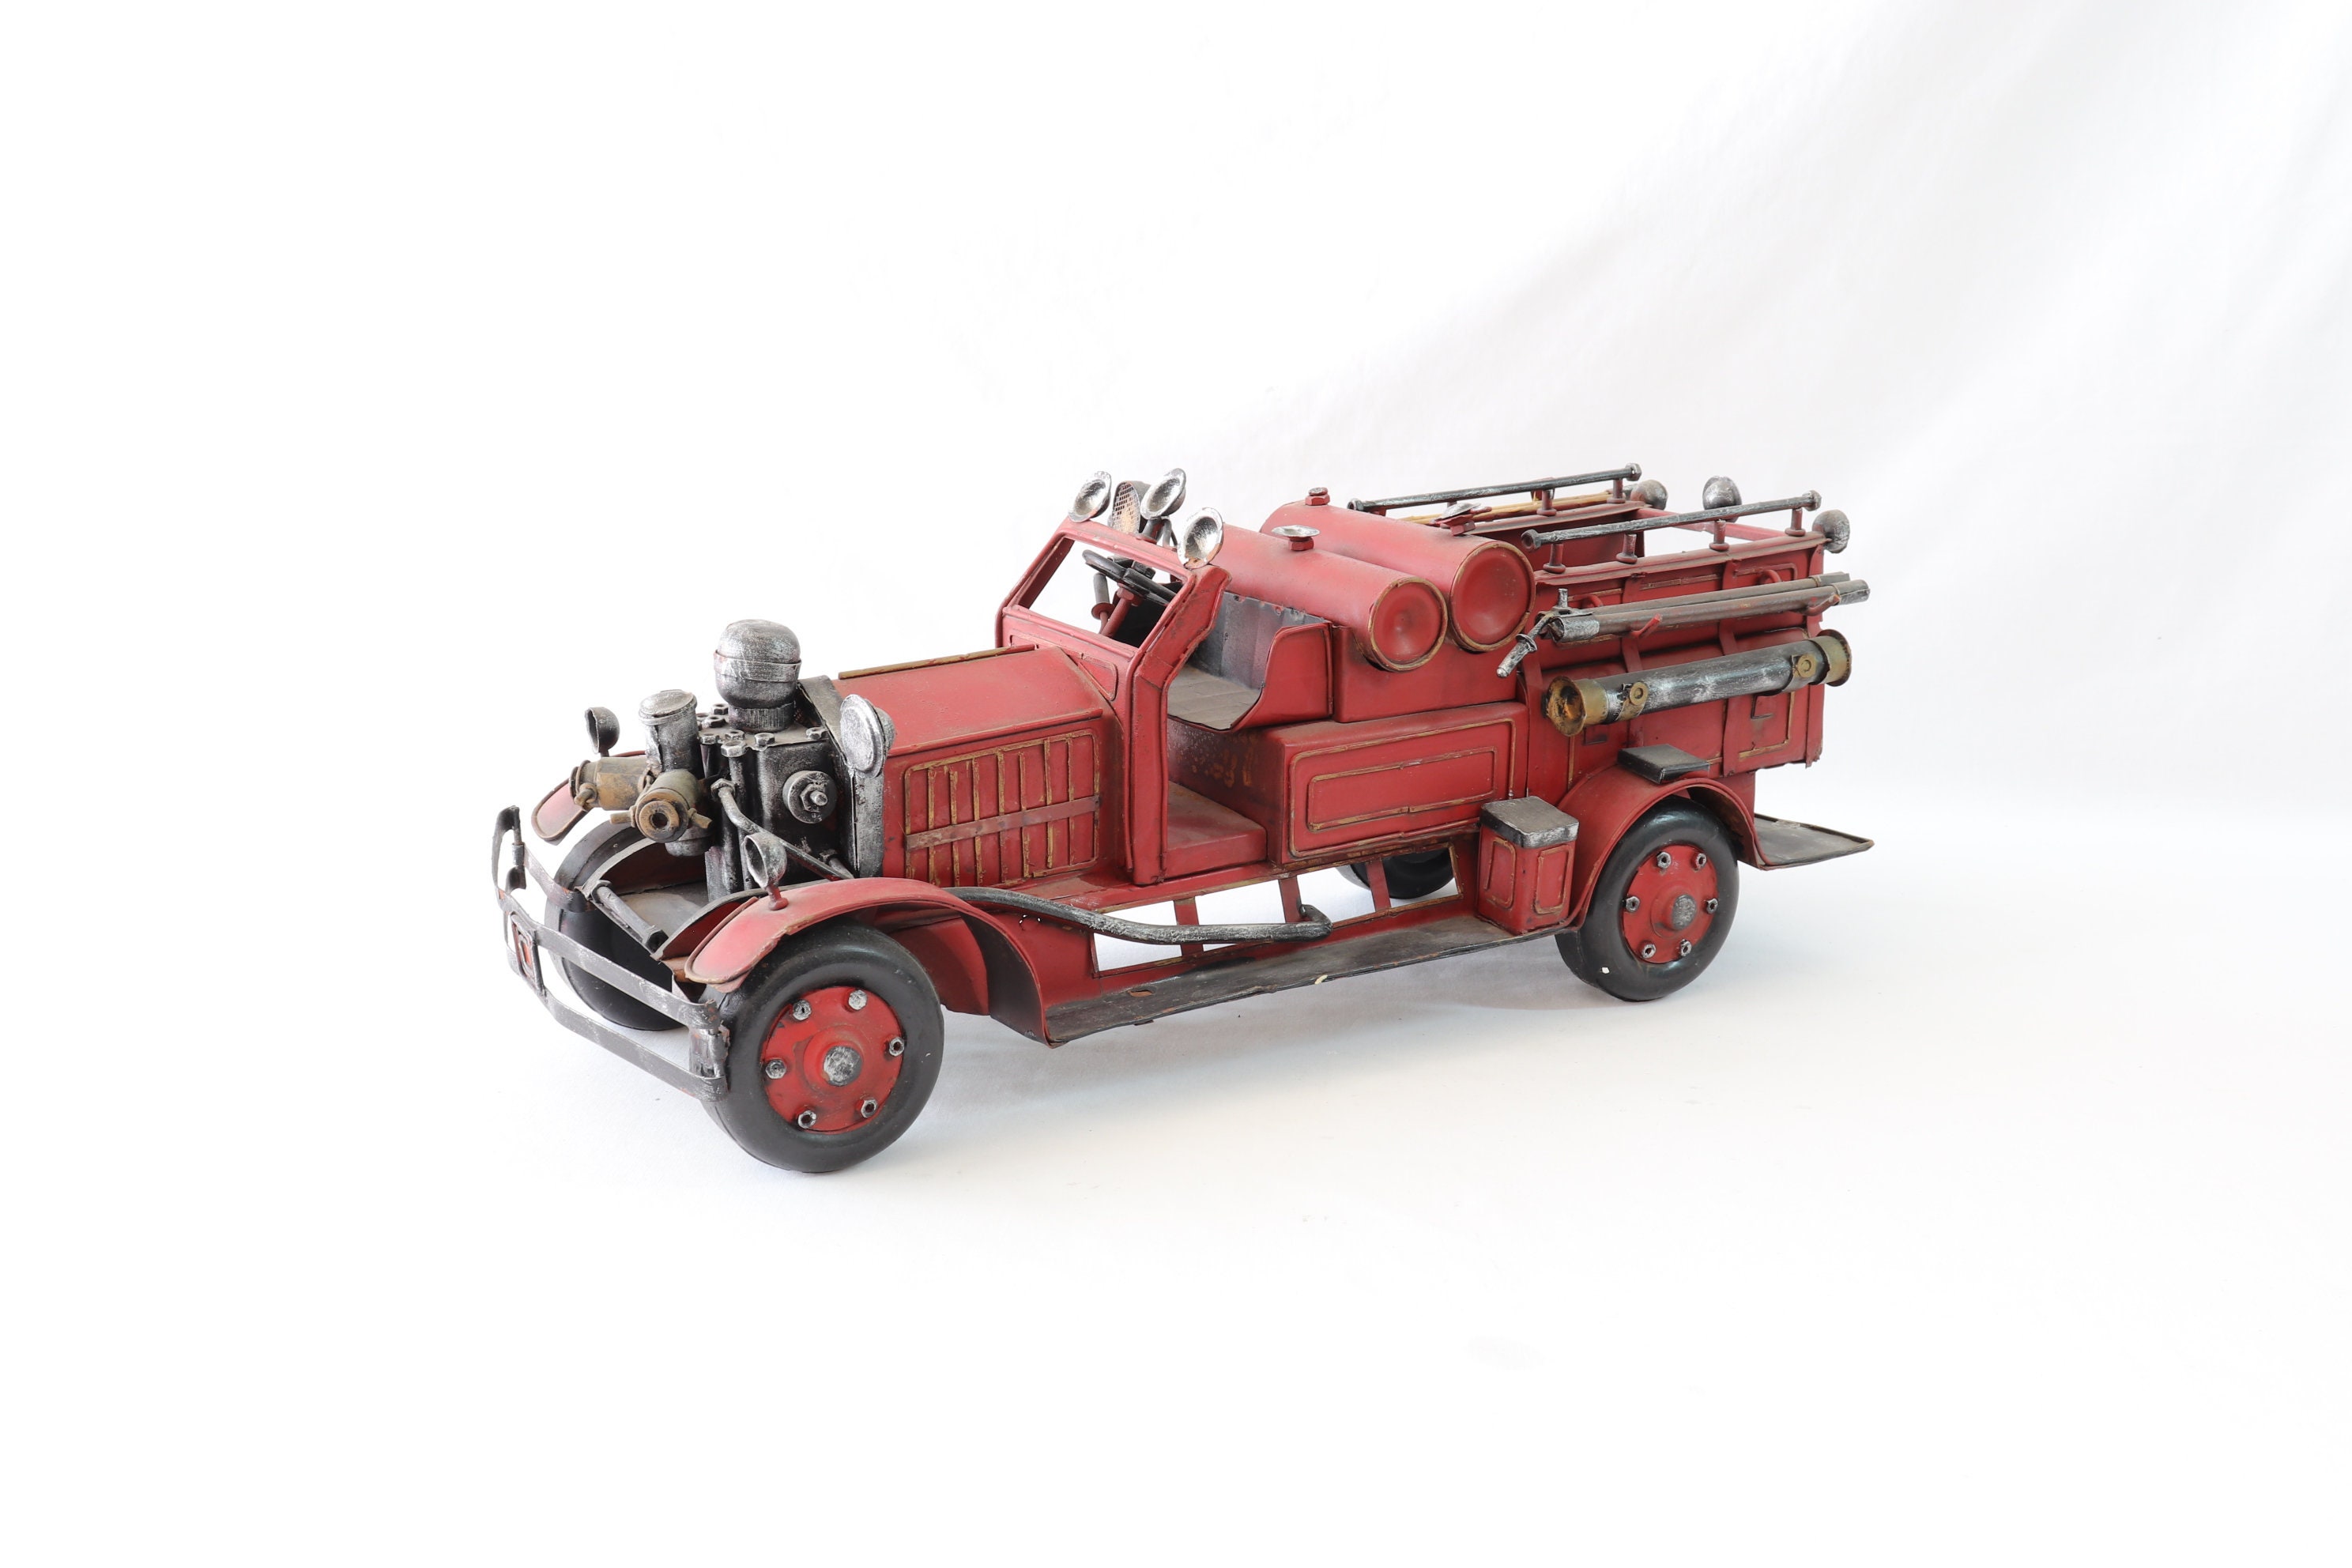 Antique Fire Truck Model, Fire Truck Miniature, Metal Car Model, Handmade  Car Model, Firefighter Gift, Car Collector, Retro Car Gift for Him -   Norway